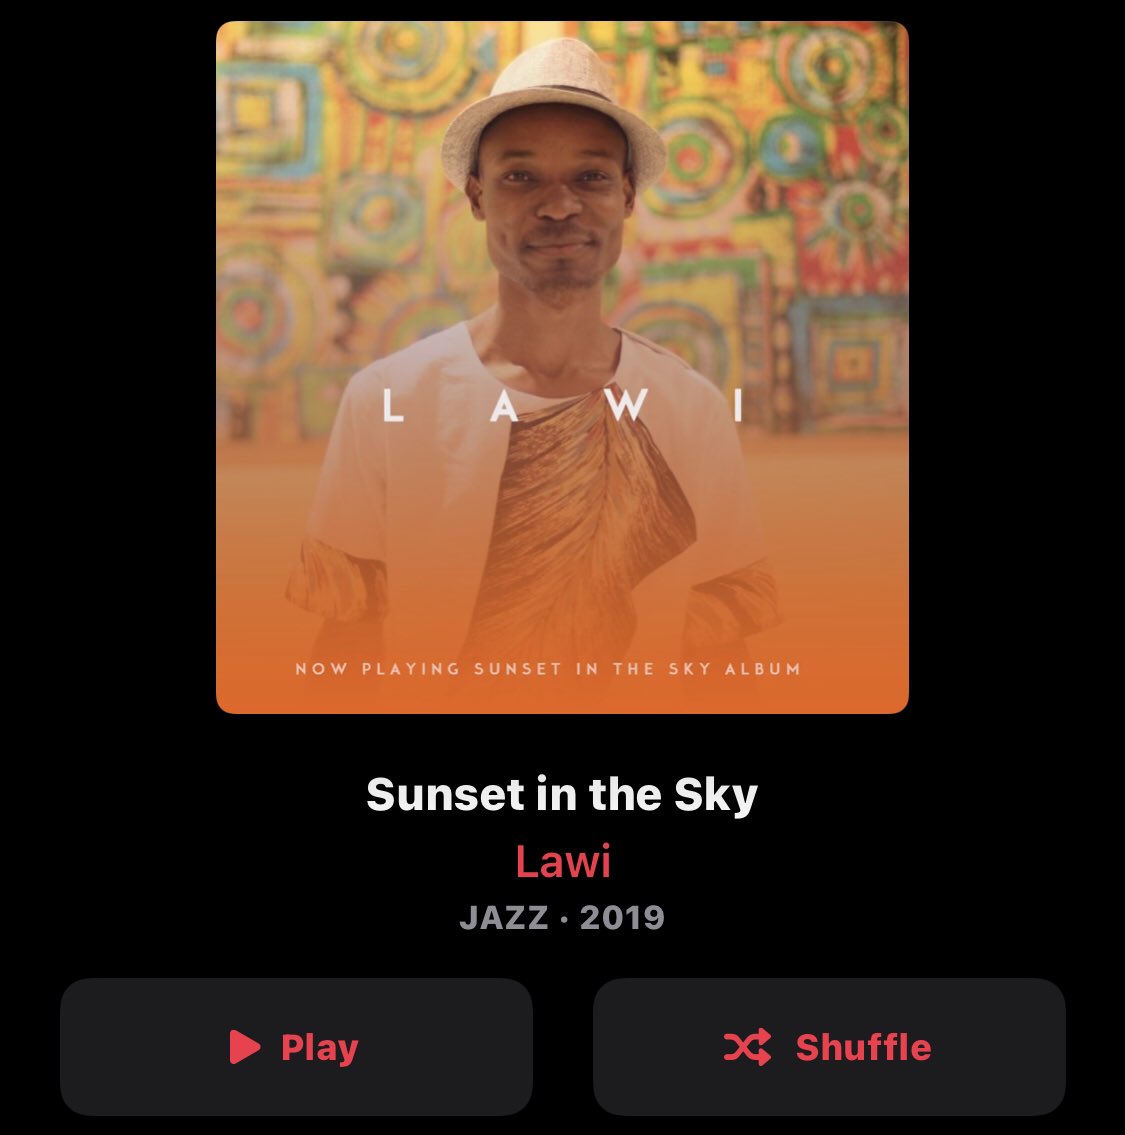 The first time someone played me a Malawian song when I arrived here it was music from Lawi. I fell in love with the music instantly. Lawi’s voice is something special. He has that overall “African sound” that reminds me of Richard Bona but he still maintains his own identity in